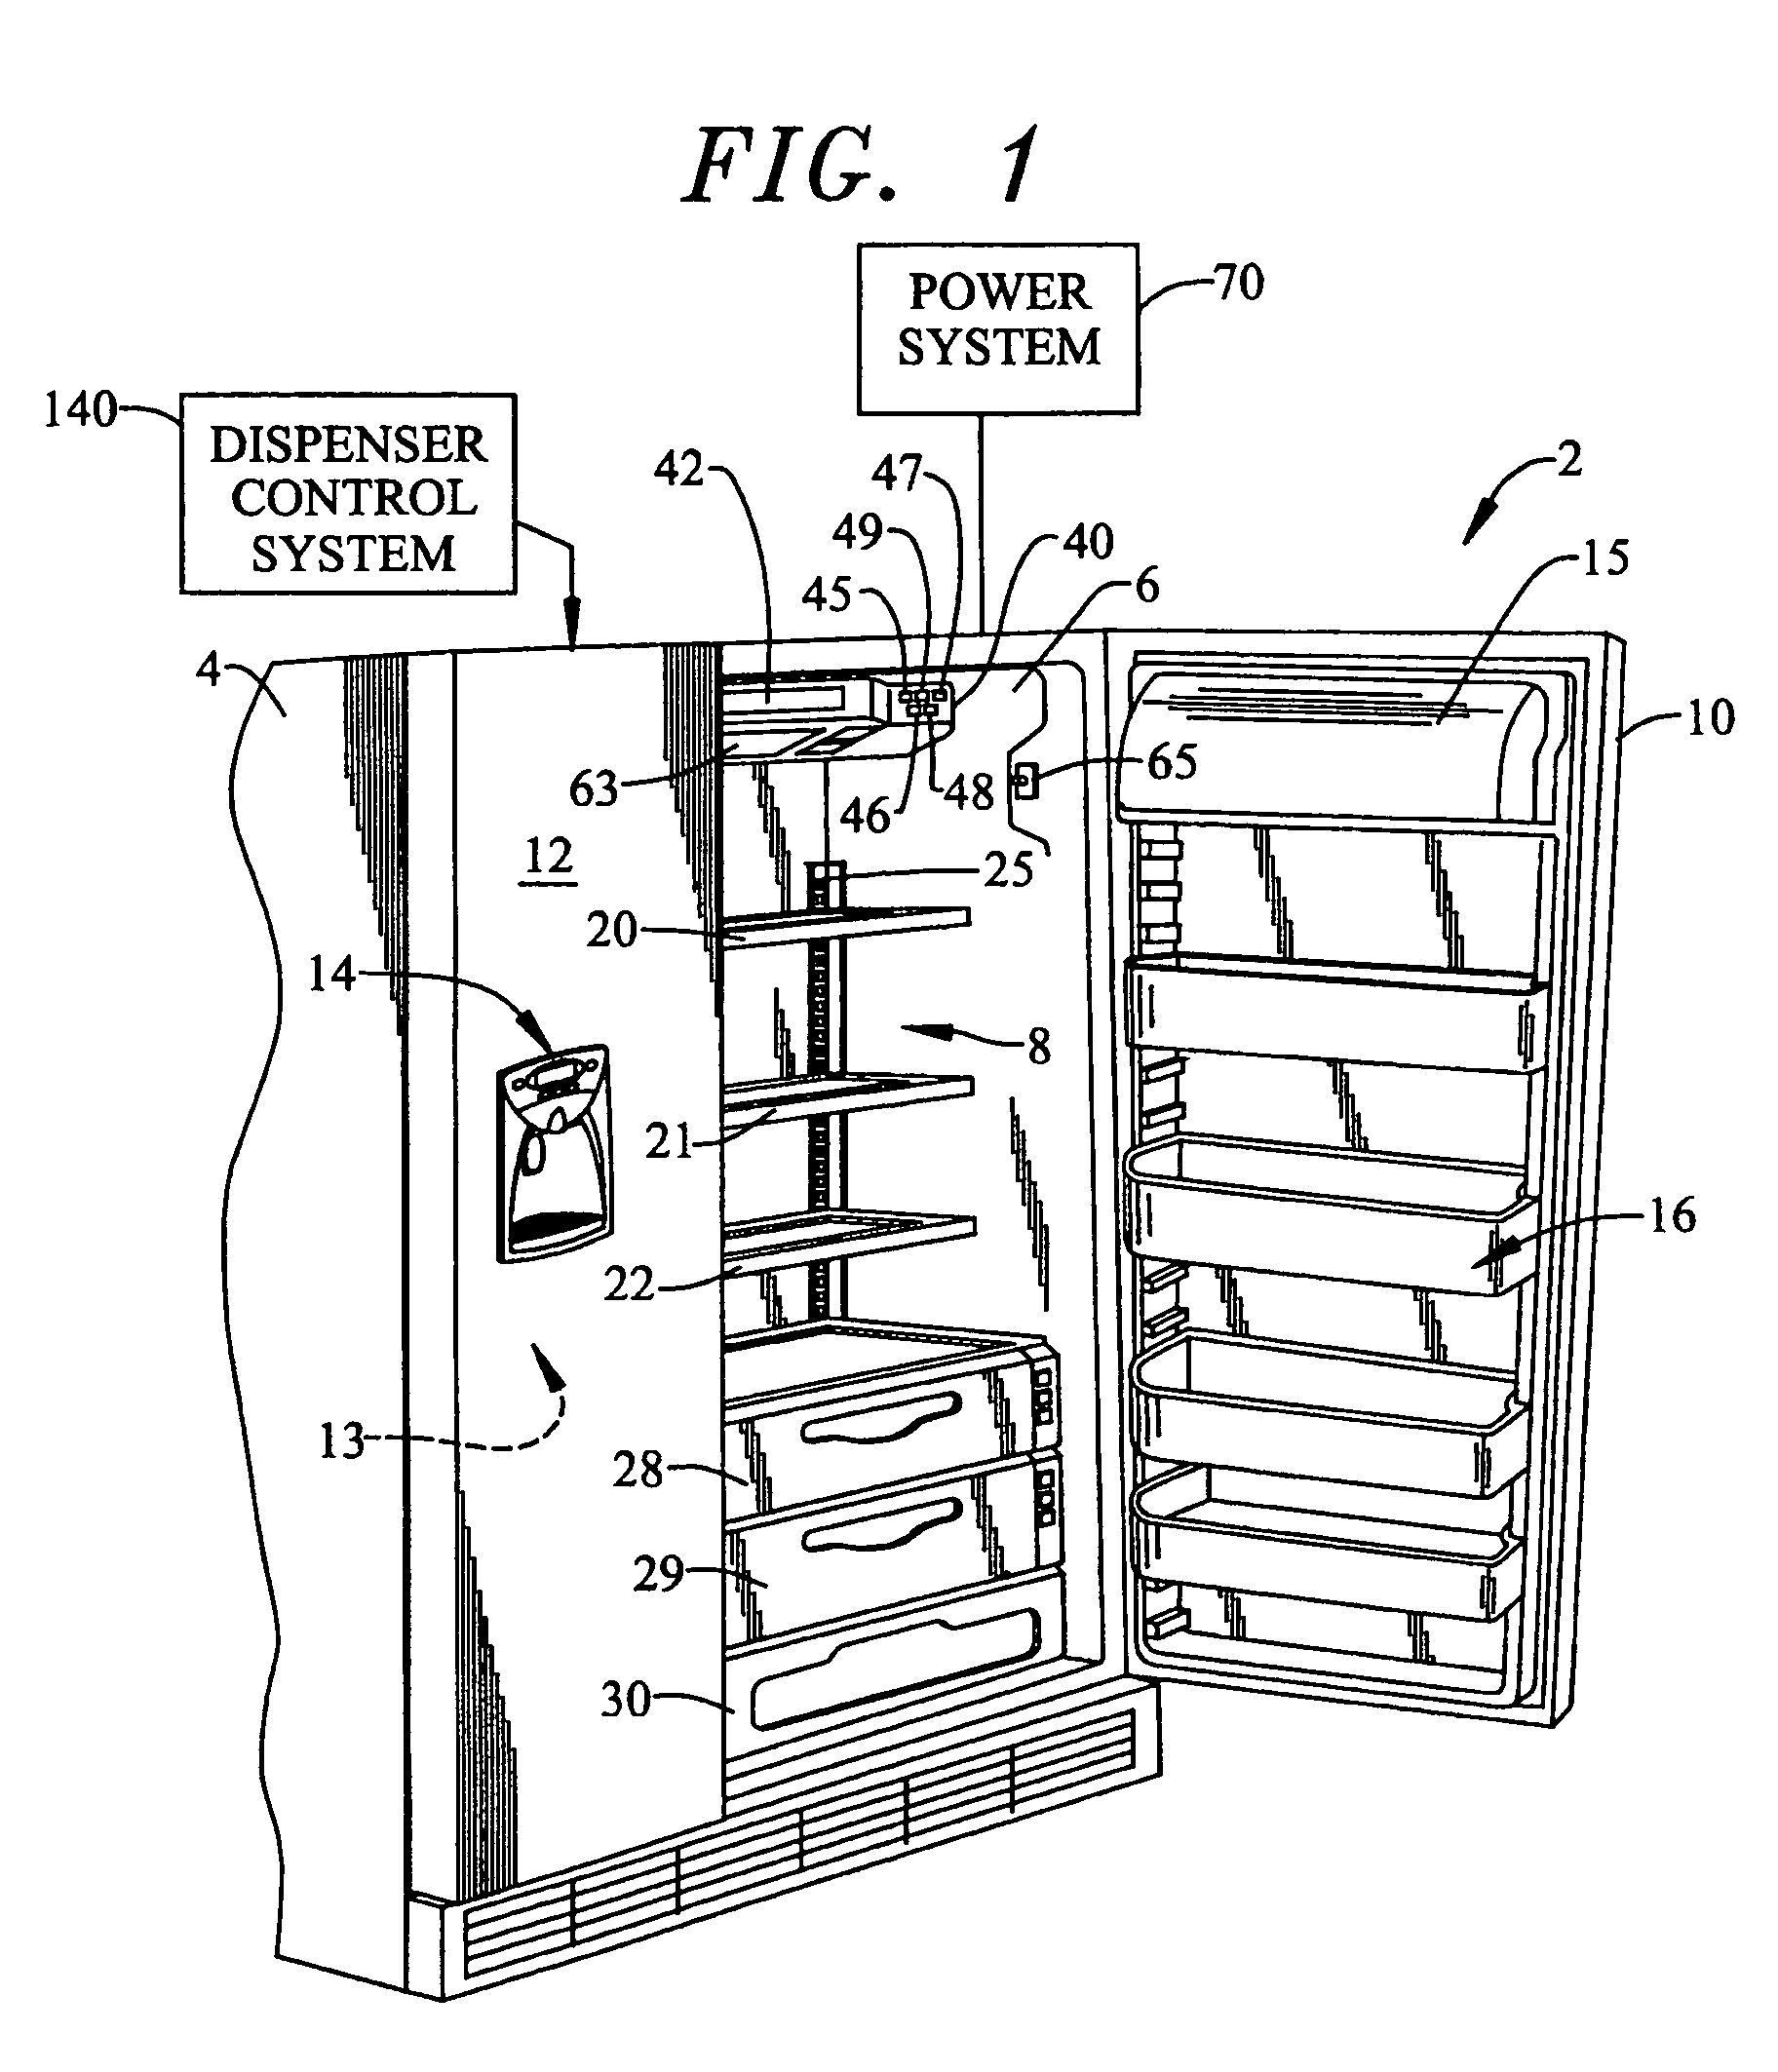 Control system for a refrigerator ice/water dispenser